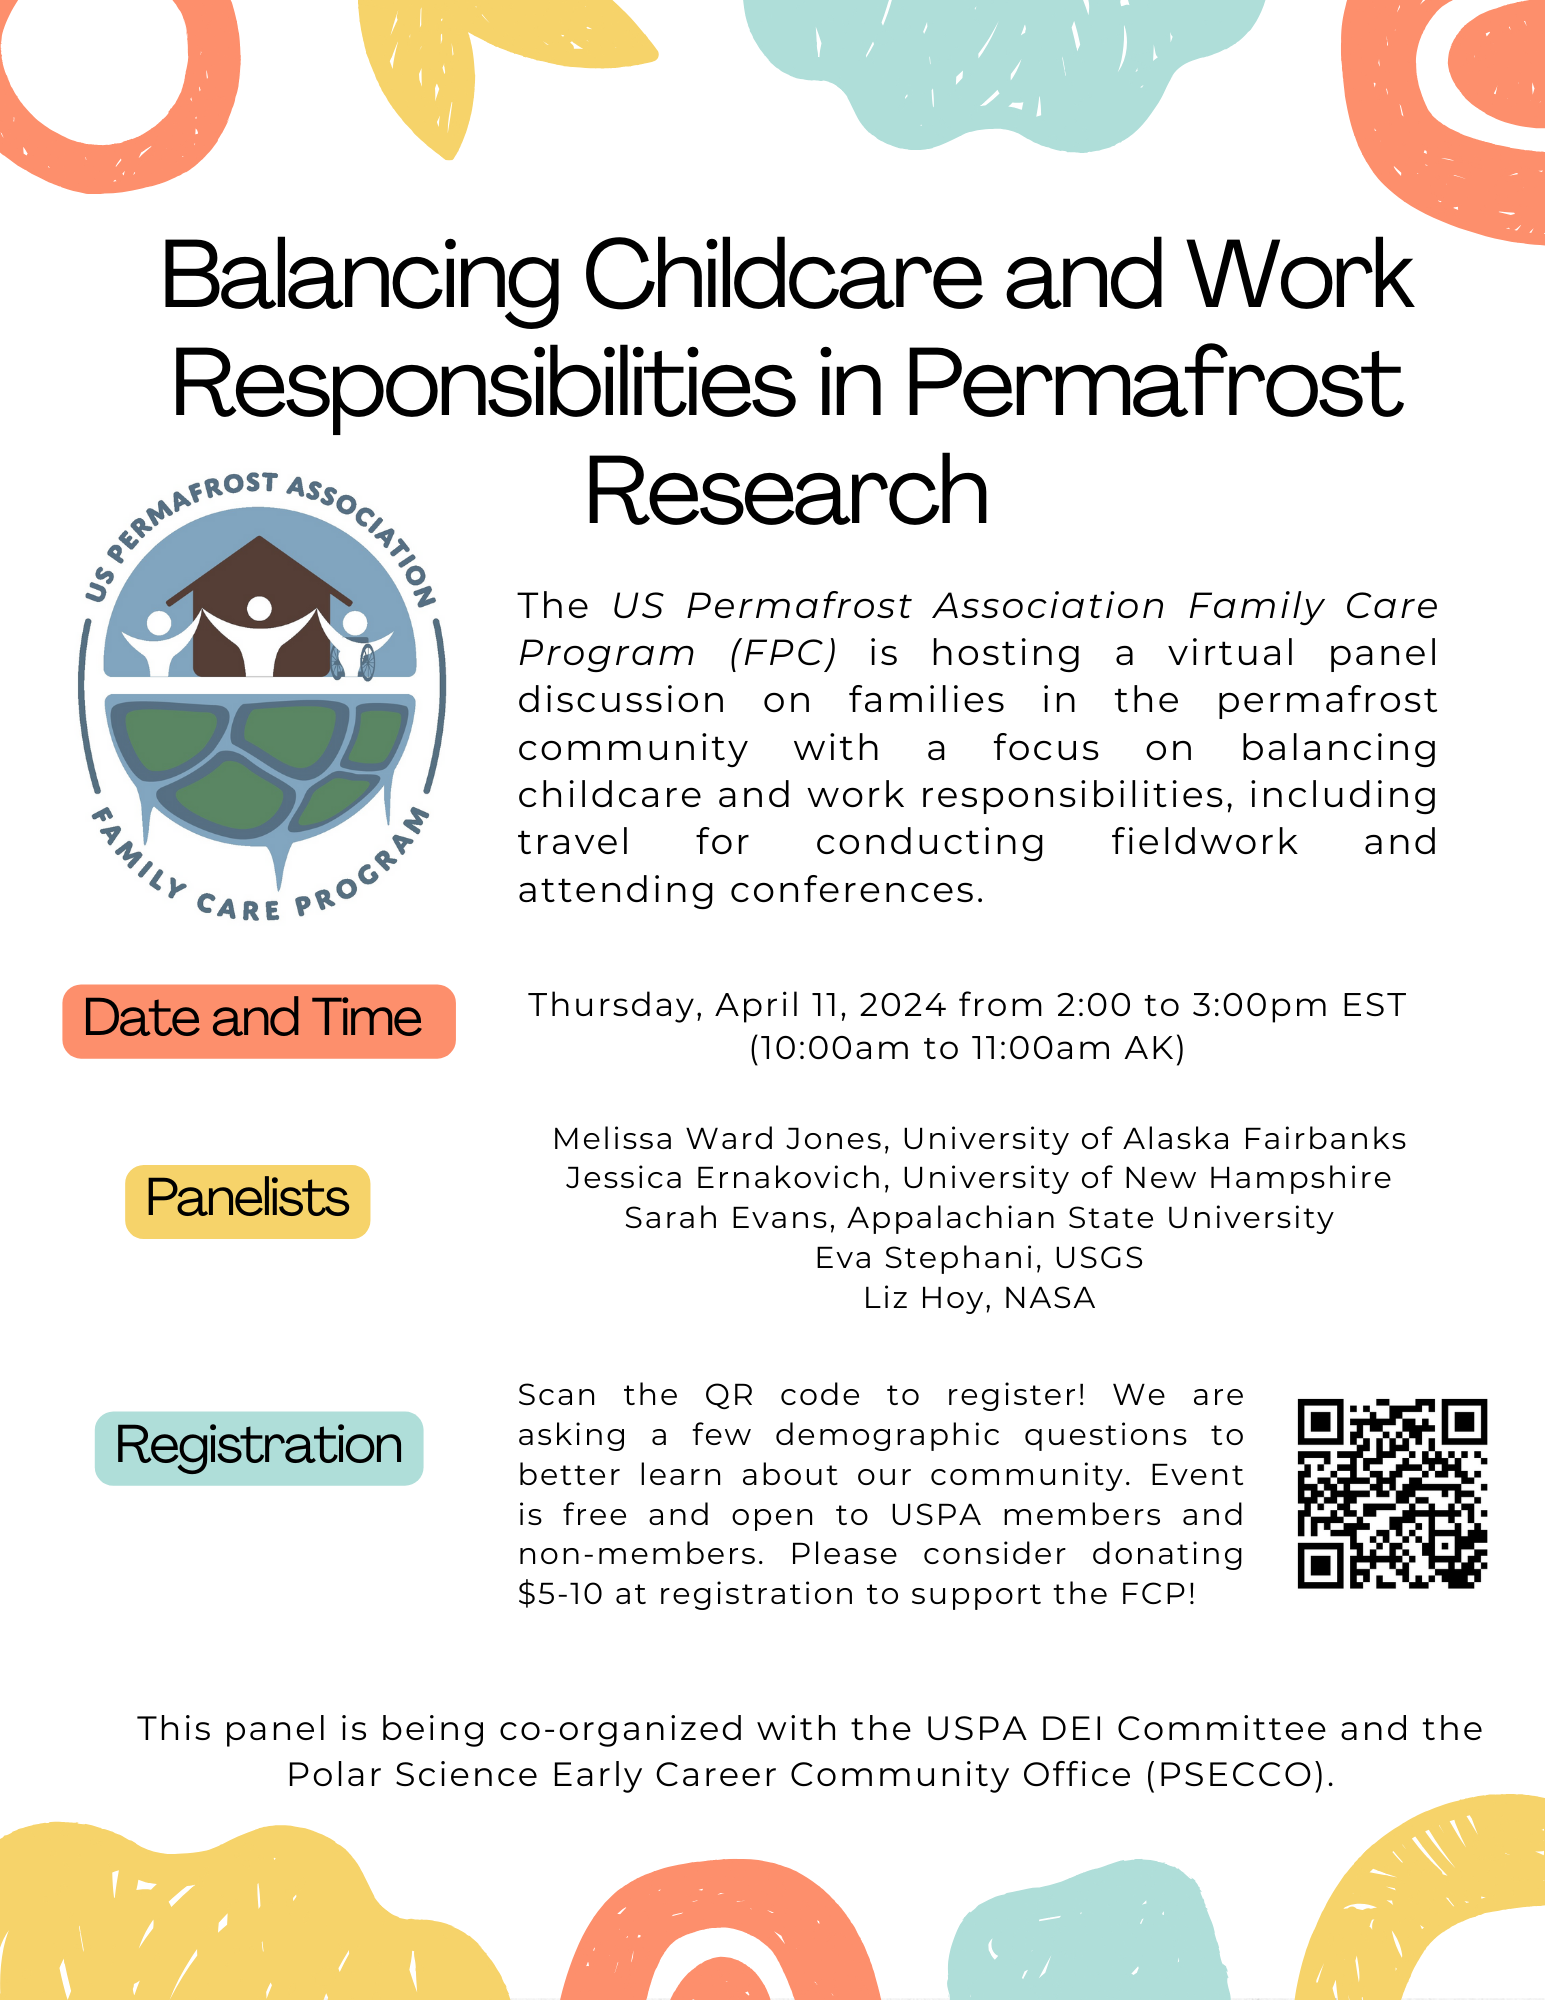 USPA &amp; PSECCO event on 'balancing childcare and work responsibilities in permafrost research